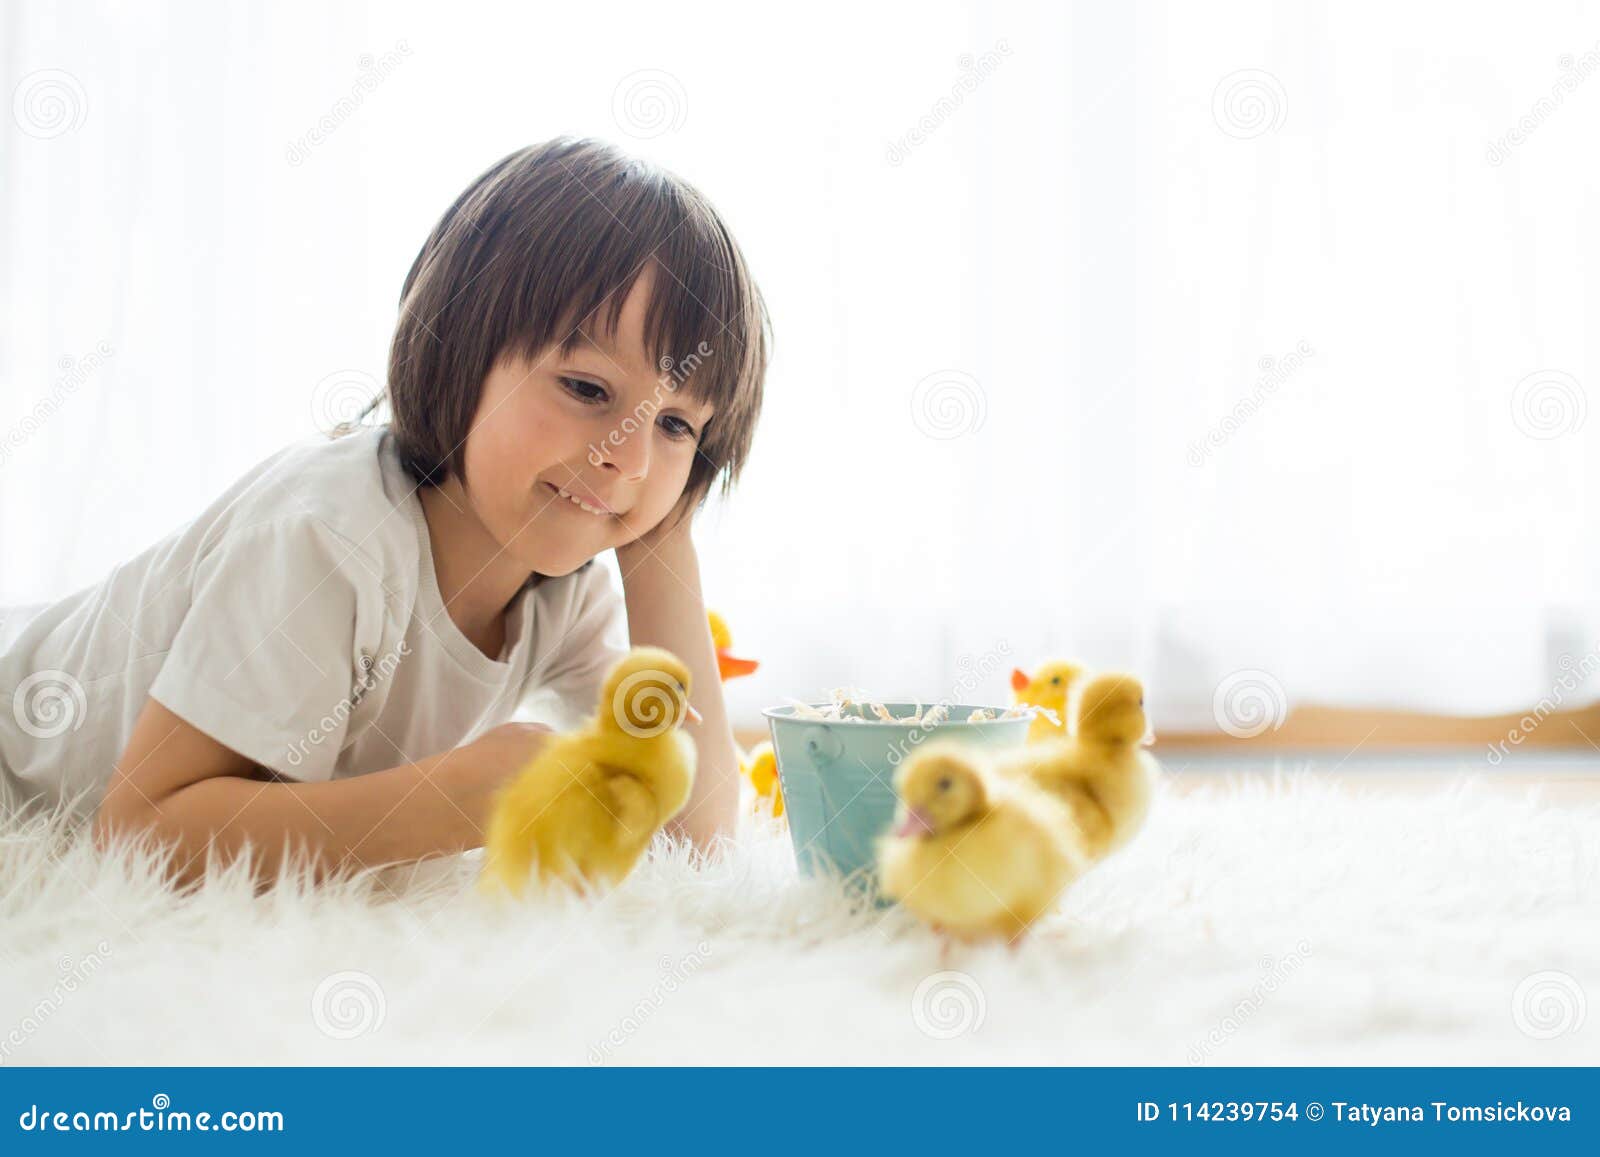 Cute Little Boy with Duckling Springtime, Playing Together Stock Photo ...